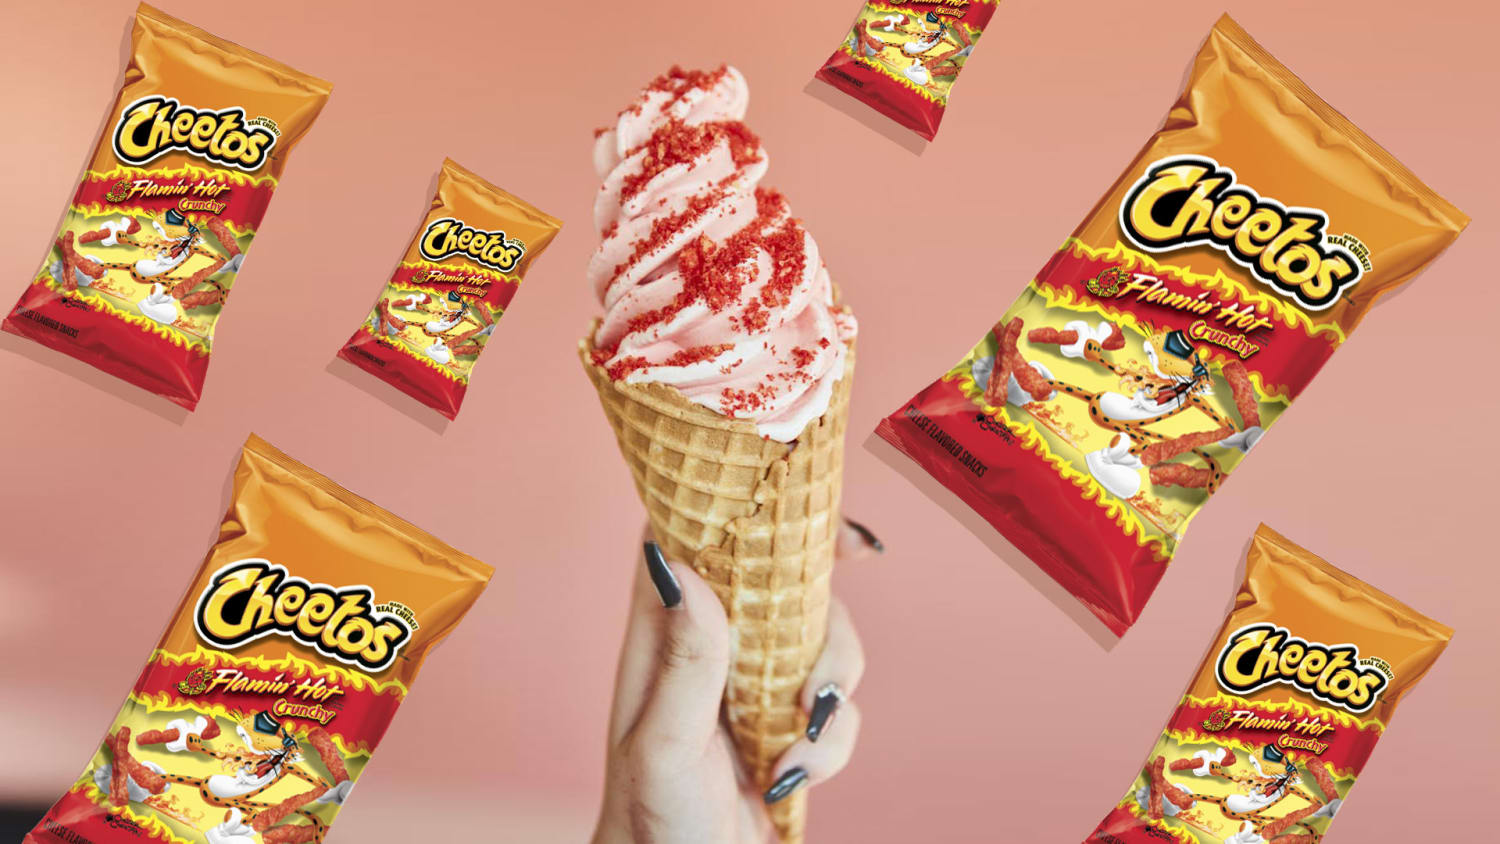 Man Who Claims He Invented Hot Cheetos Responds to Frito-Lay's Claims